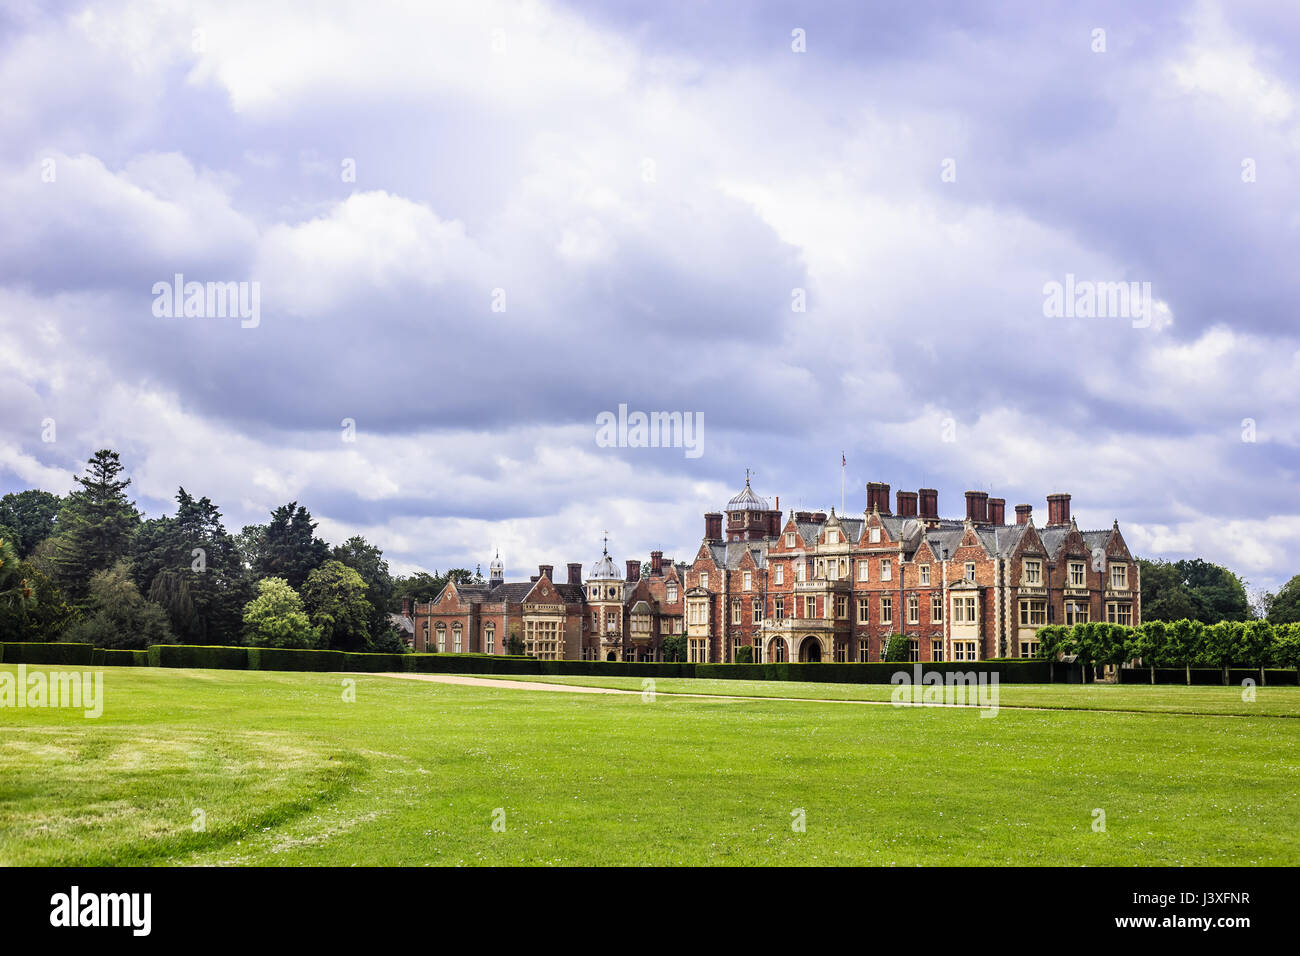 Sandringham House, Queen's country residence in NORFOLK REGNO UNITO Foto Stock